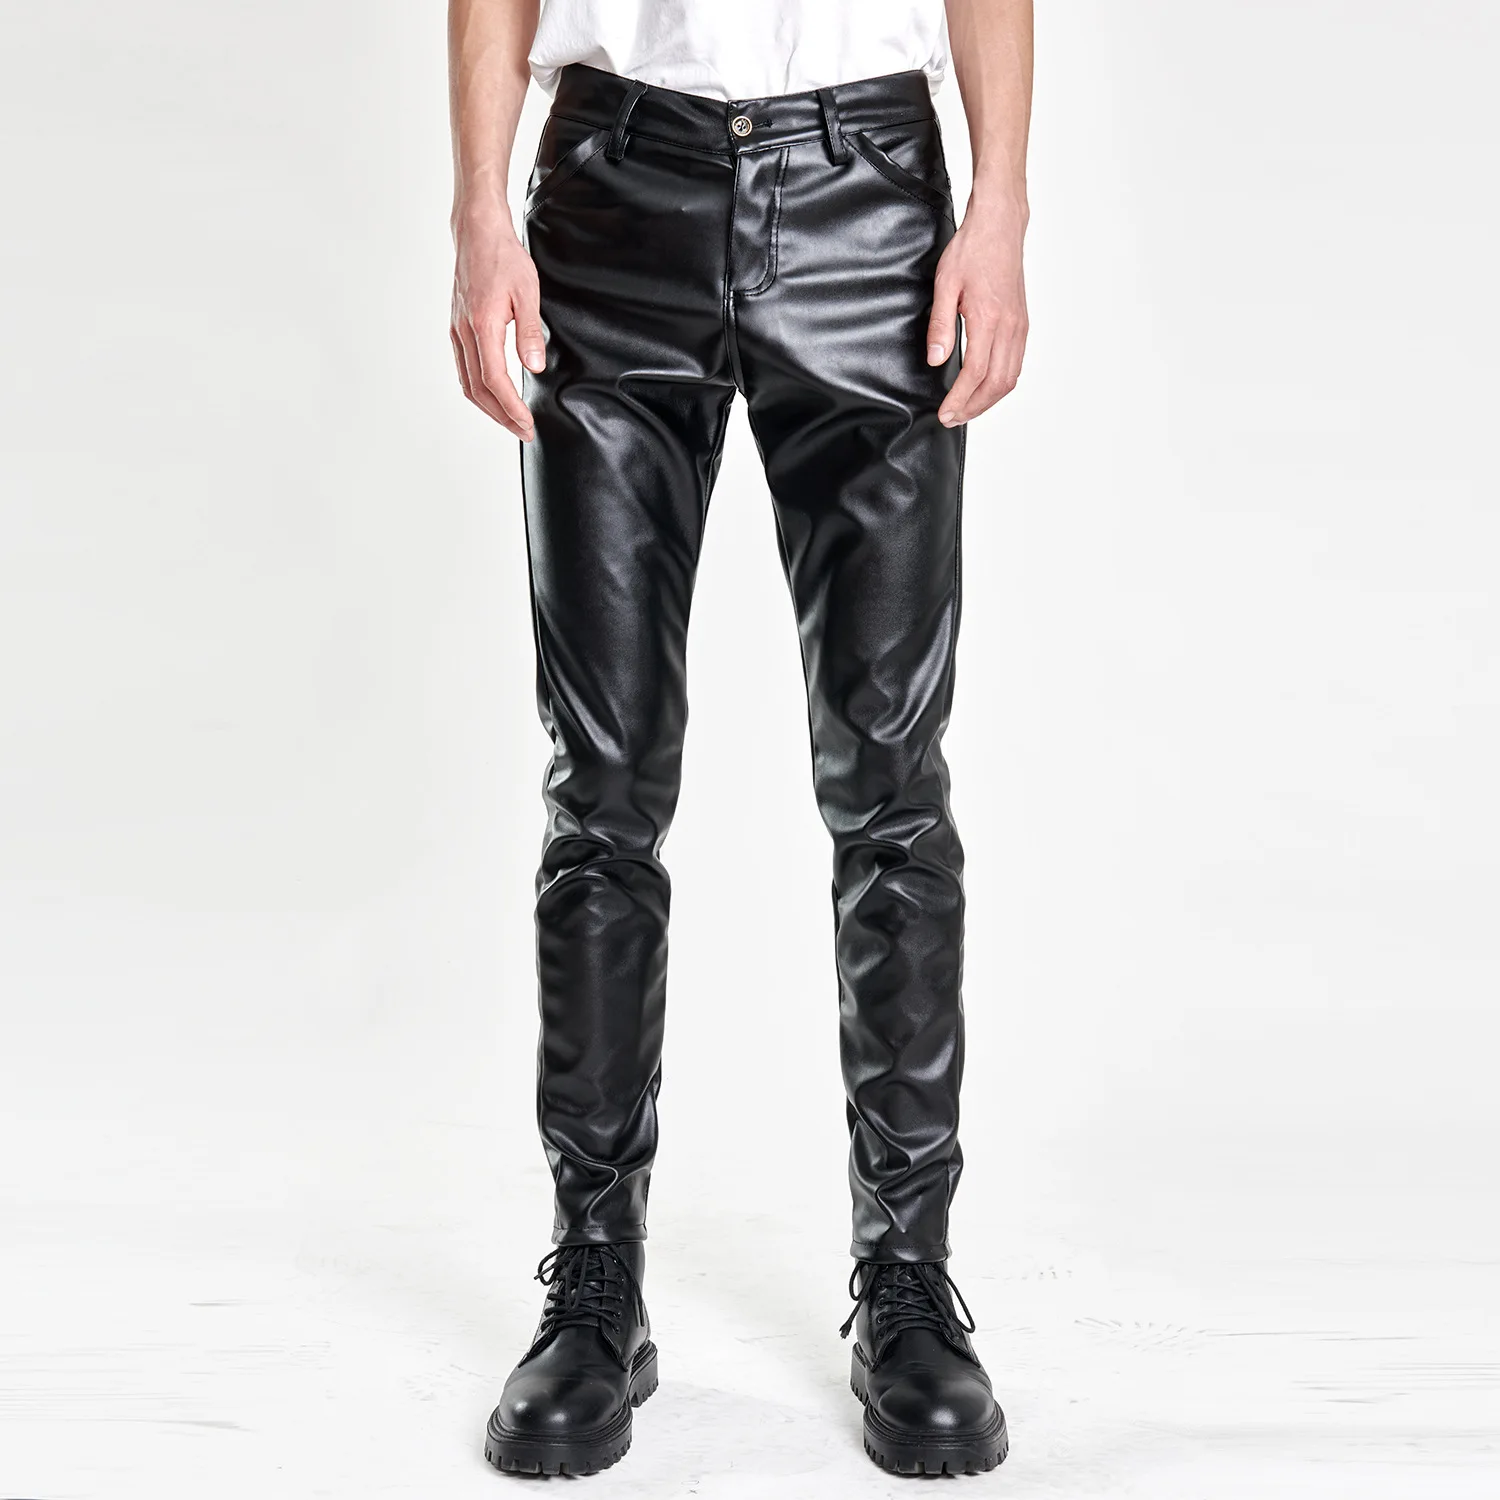 Faux Leather Pants Men Black Gold White Thin PU Leather Trousers Brand Men Clothing  leather pants men  mens leather pants